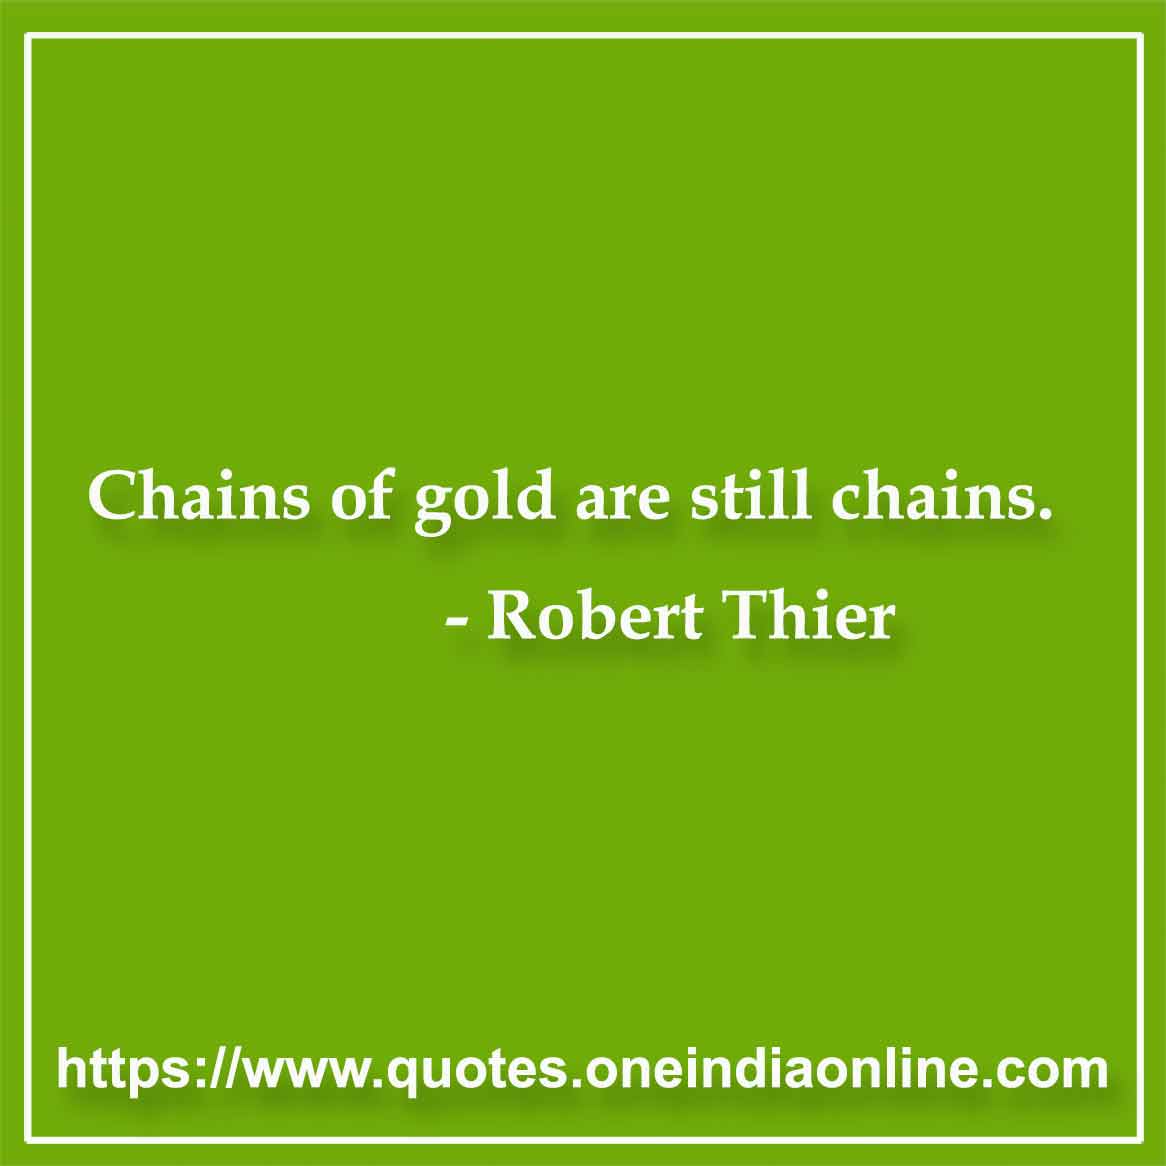 Chains of gold are still chains.

- Robert Thier